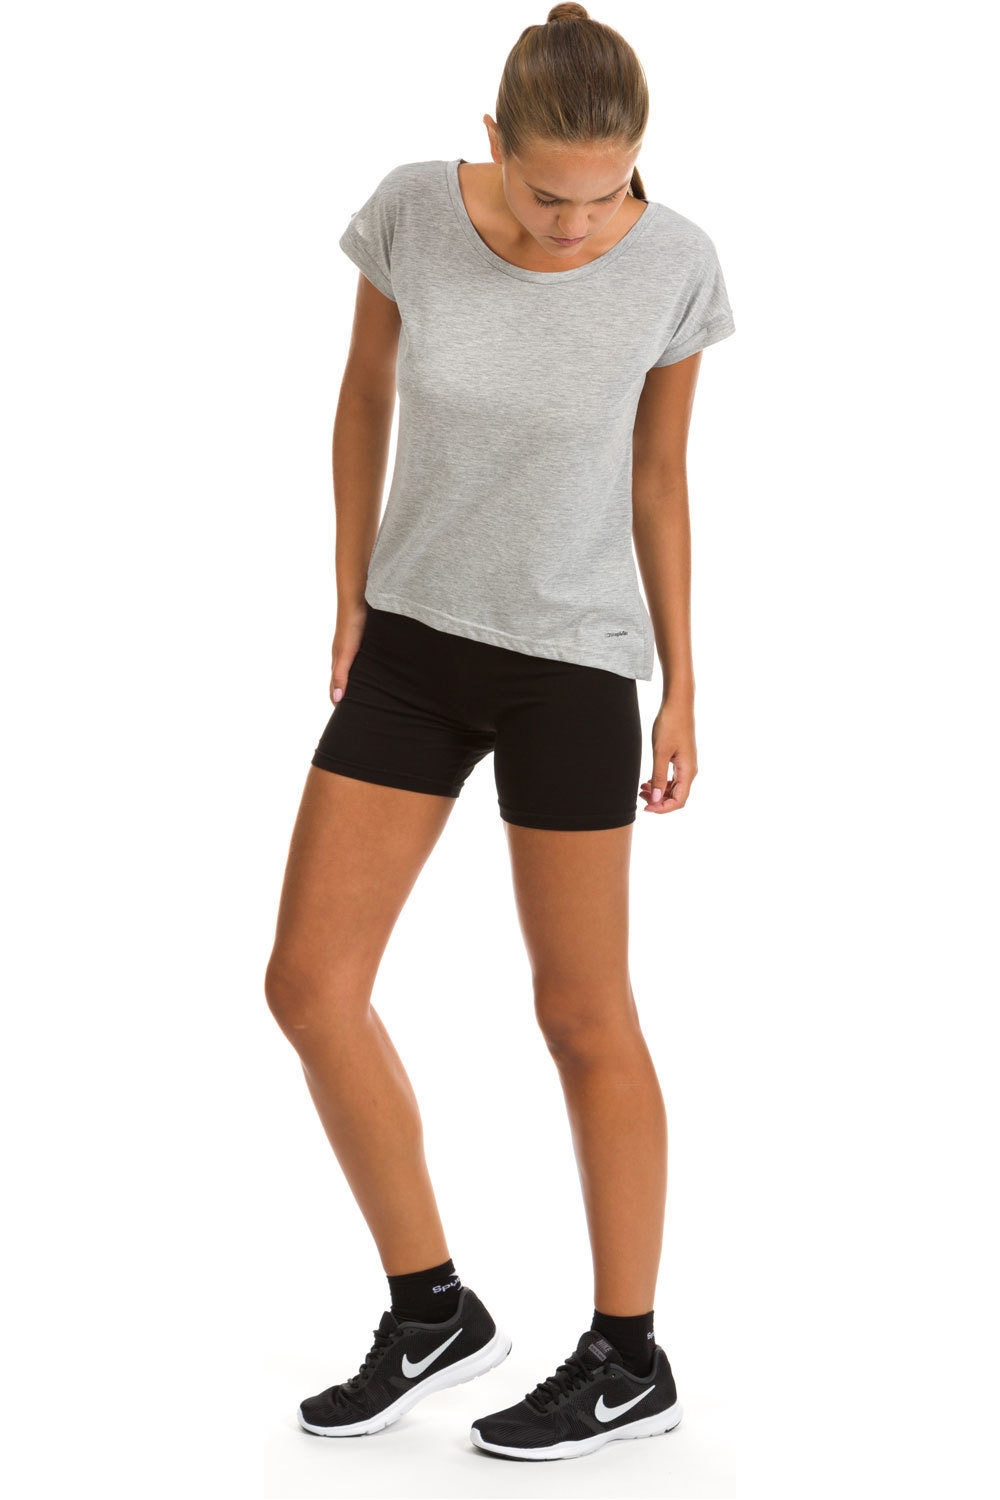 Step&Go camisetas fitness mujer T-ANOTHER vista detalle